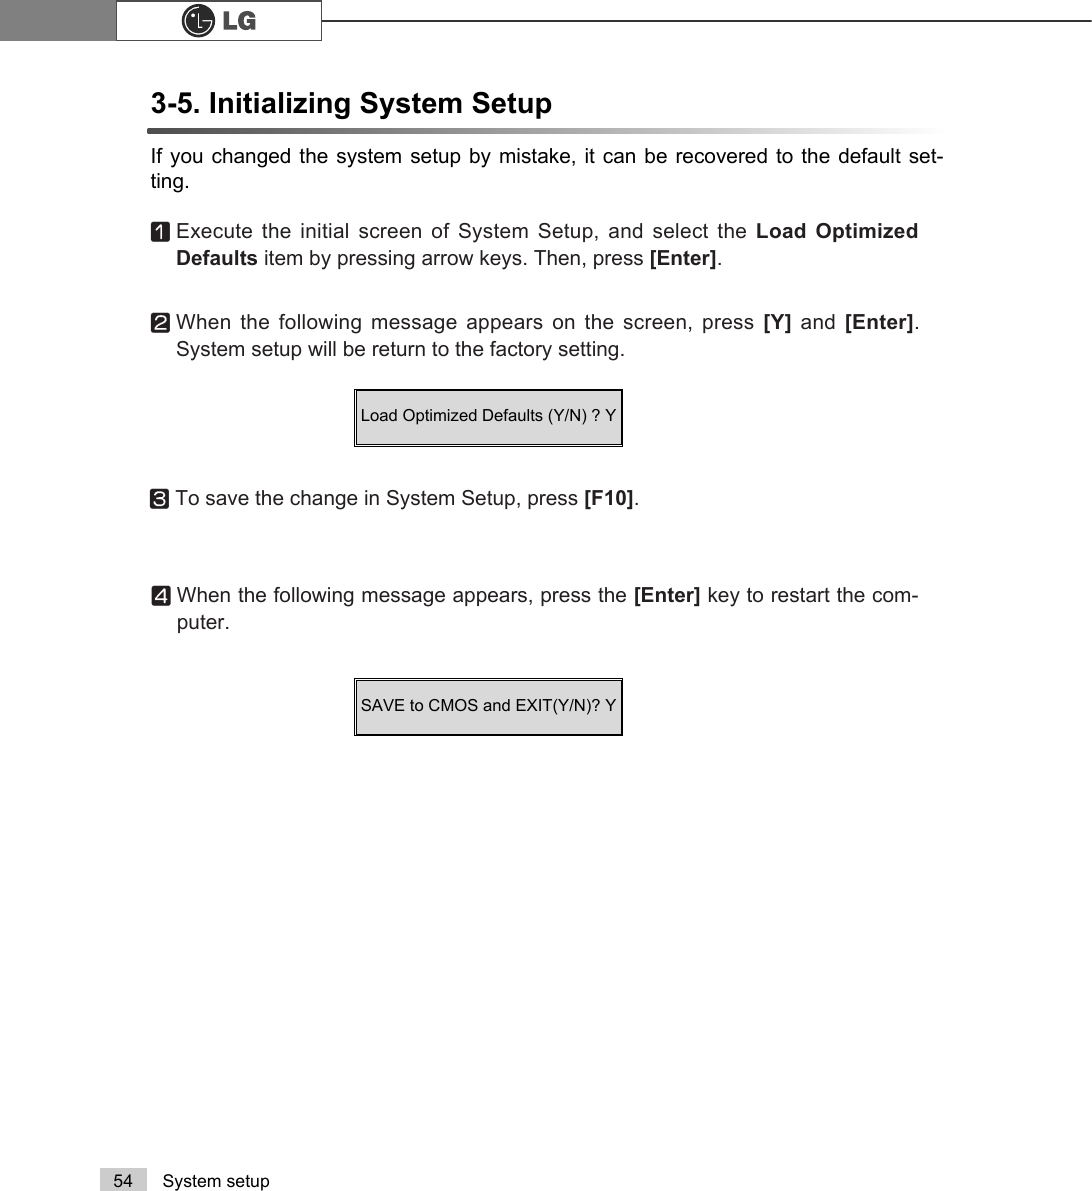 54 System setup3-5. Initializing System Setup If you changed the system setup by mistake, it can be recovered to the default set-ting.ⓞExecute the initial screen of System Setup, and select the Load OptimizedDefaults item by pressing arrow keys. Then, press [Enter].ⓟWhen the following message appears on the screen, press [Y]  and  [Enter].System setup will be return to the factory setting.ⓠTo save the change in System Setup, press [F10]. ⓡWhen the following message appears, press the [Enter] key to restart the com-puter.SAVE to CMOS and EXIT(Y/N)? Y Load Optimized Defaults (Y/N) ? Y